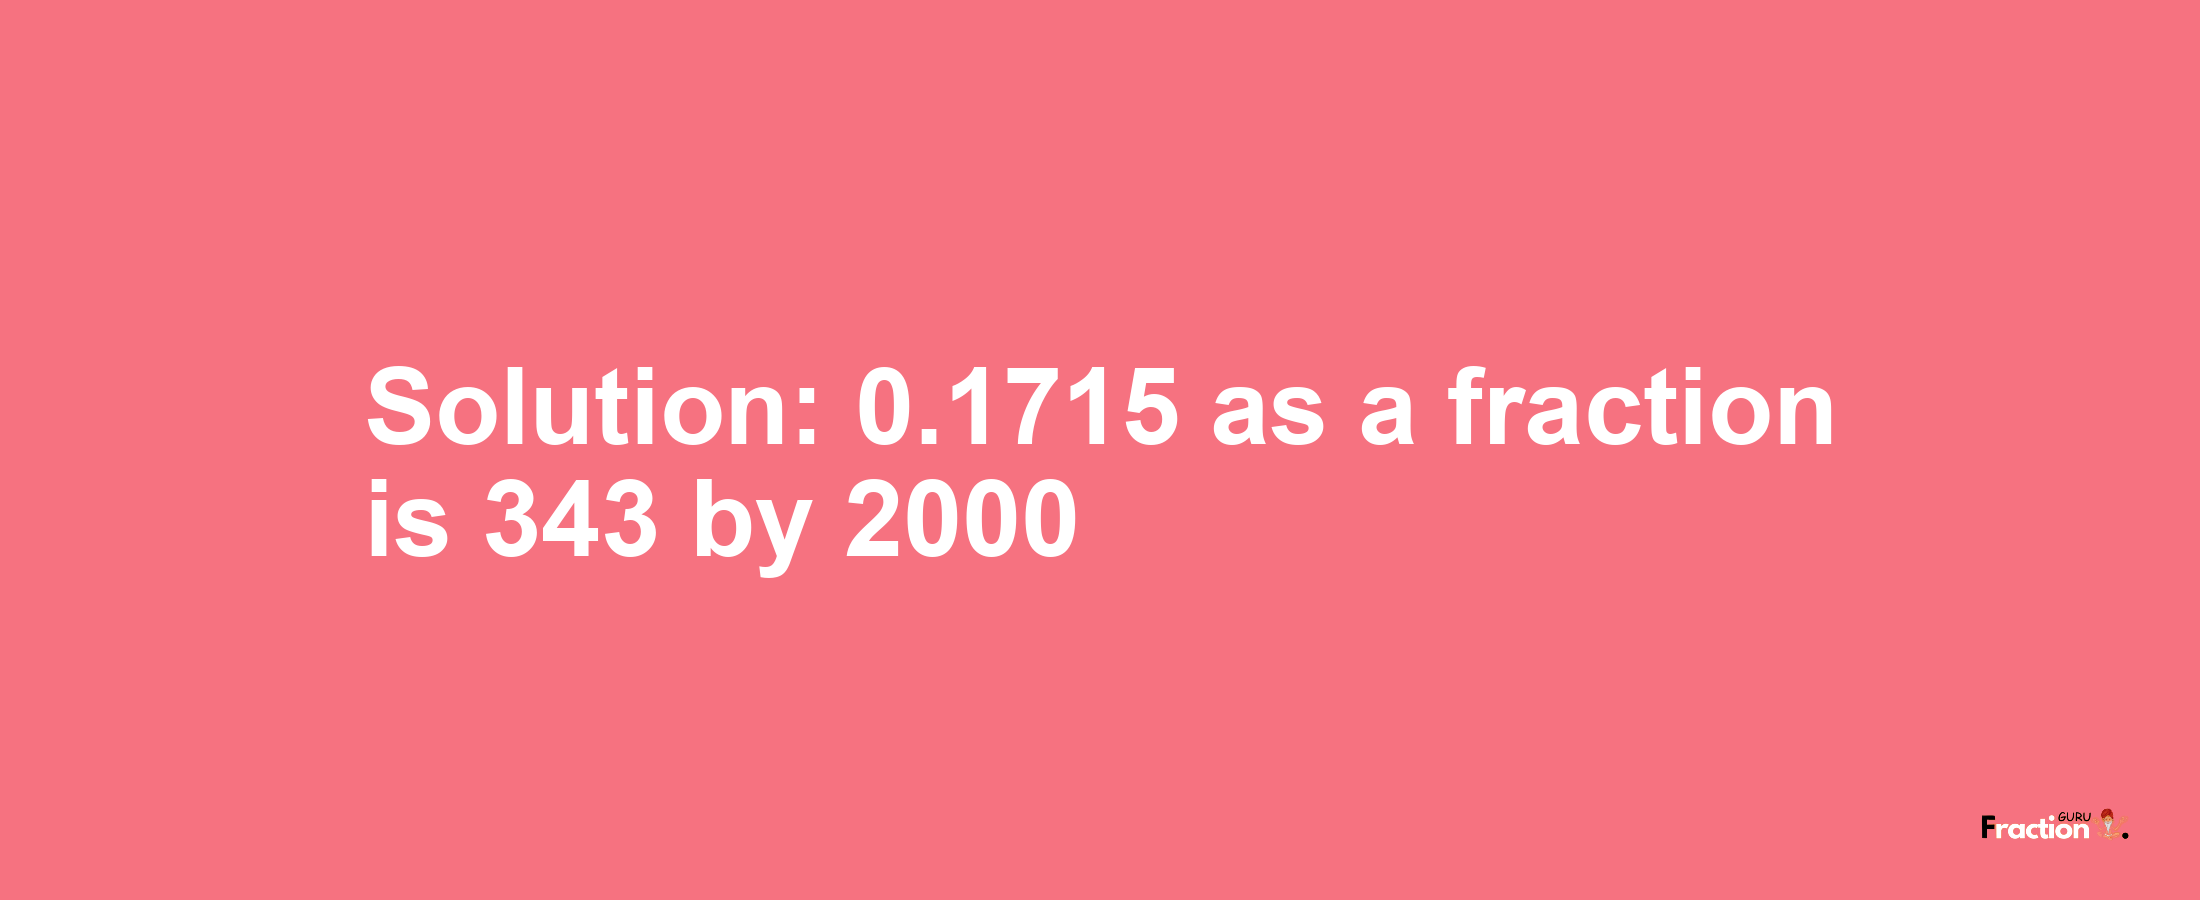 Solution:0.1715 as a fraction is 343/2000